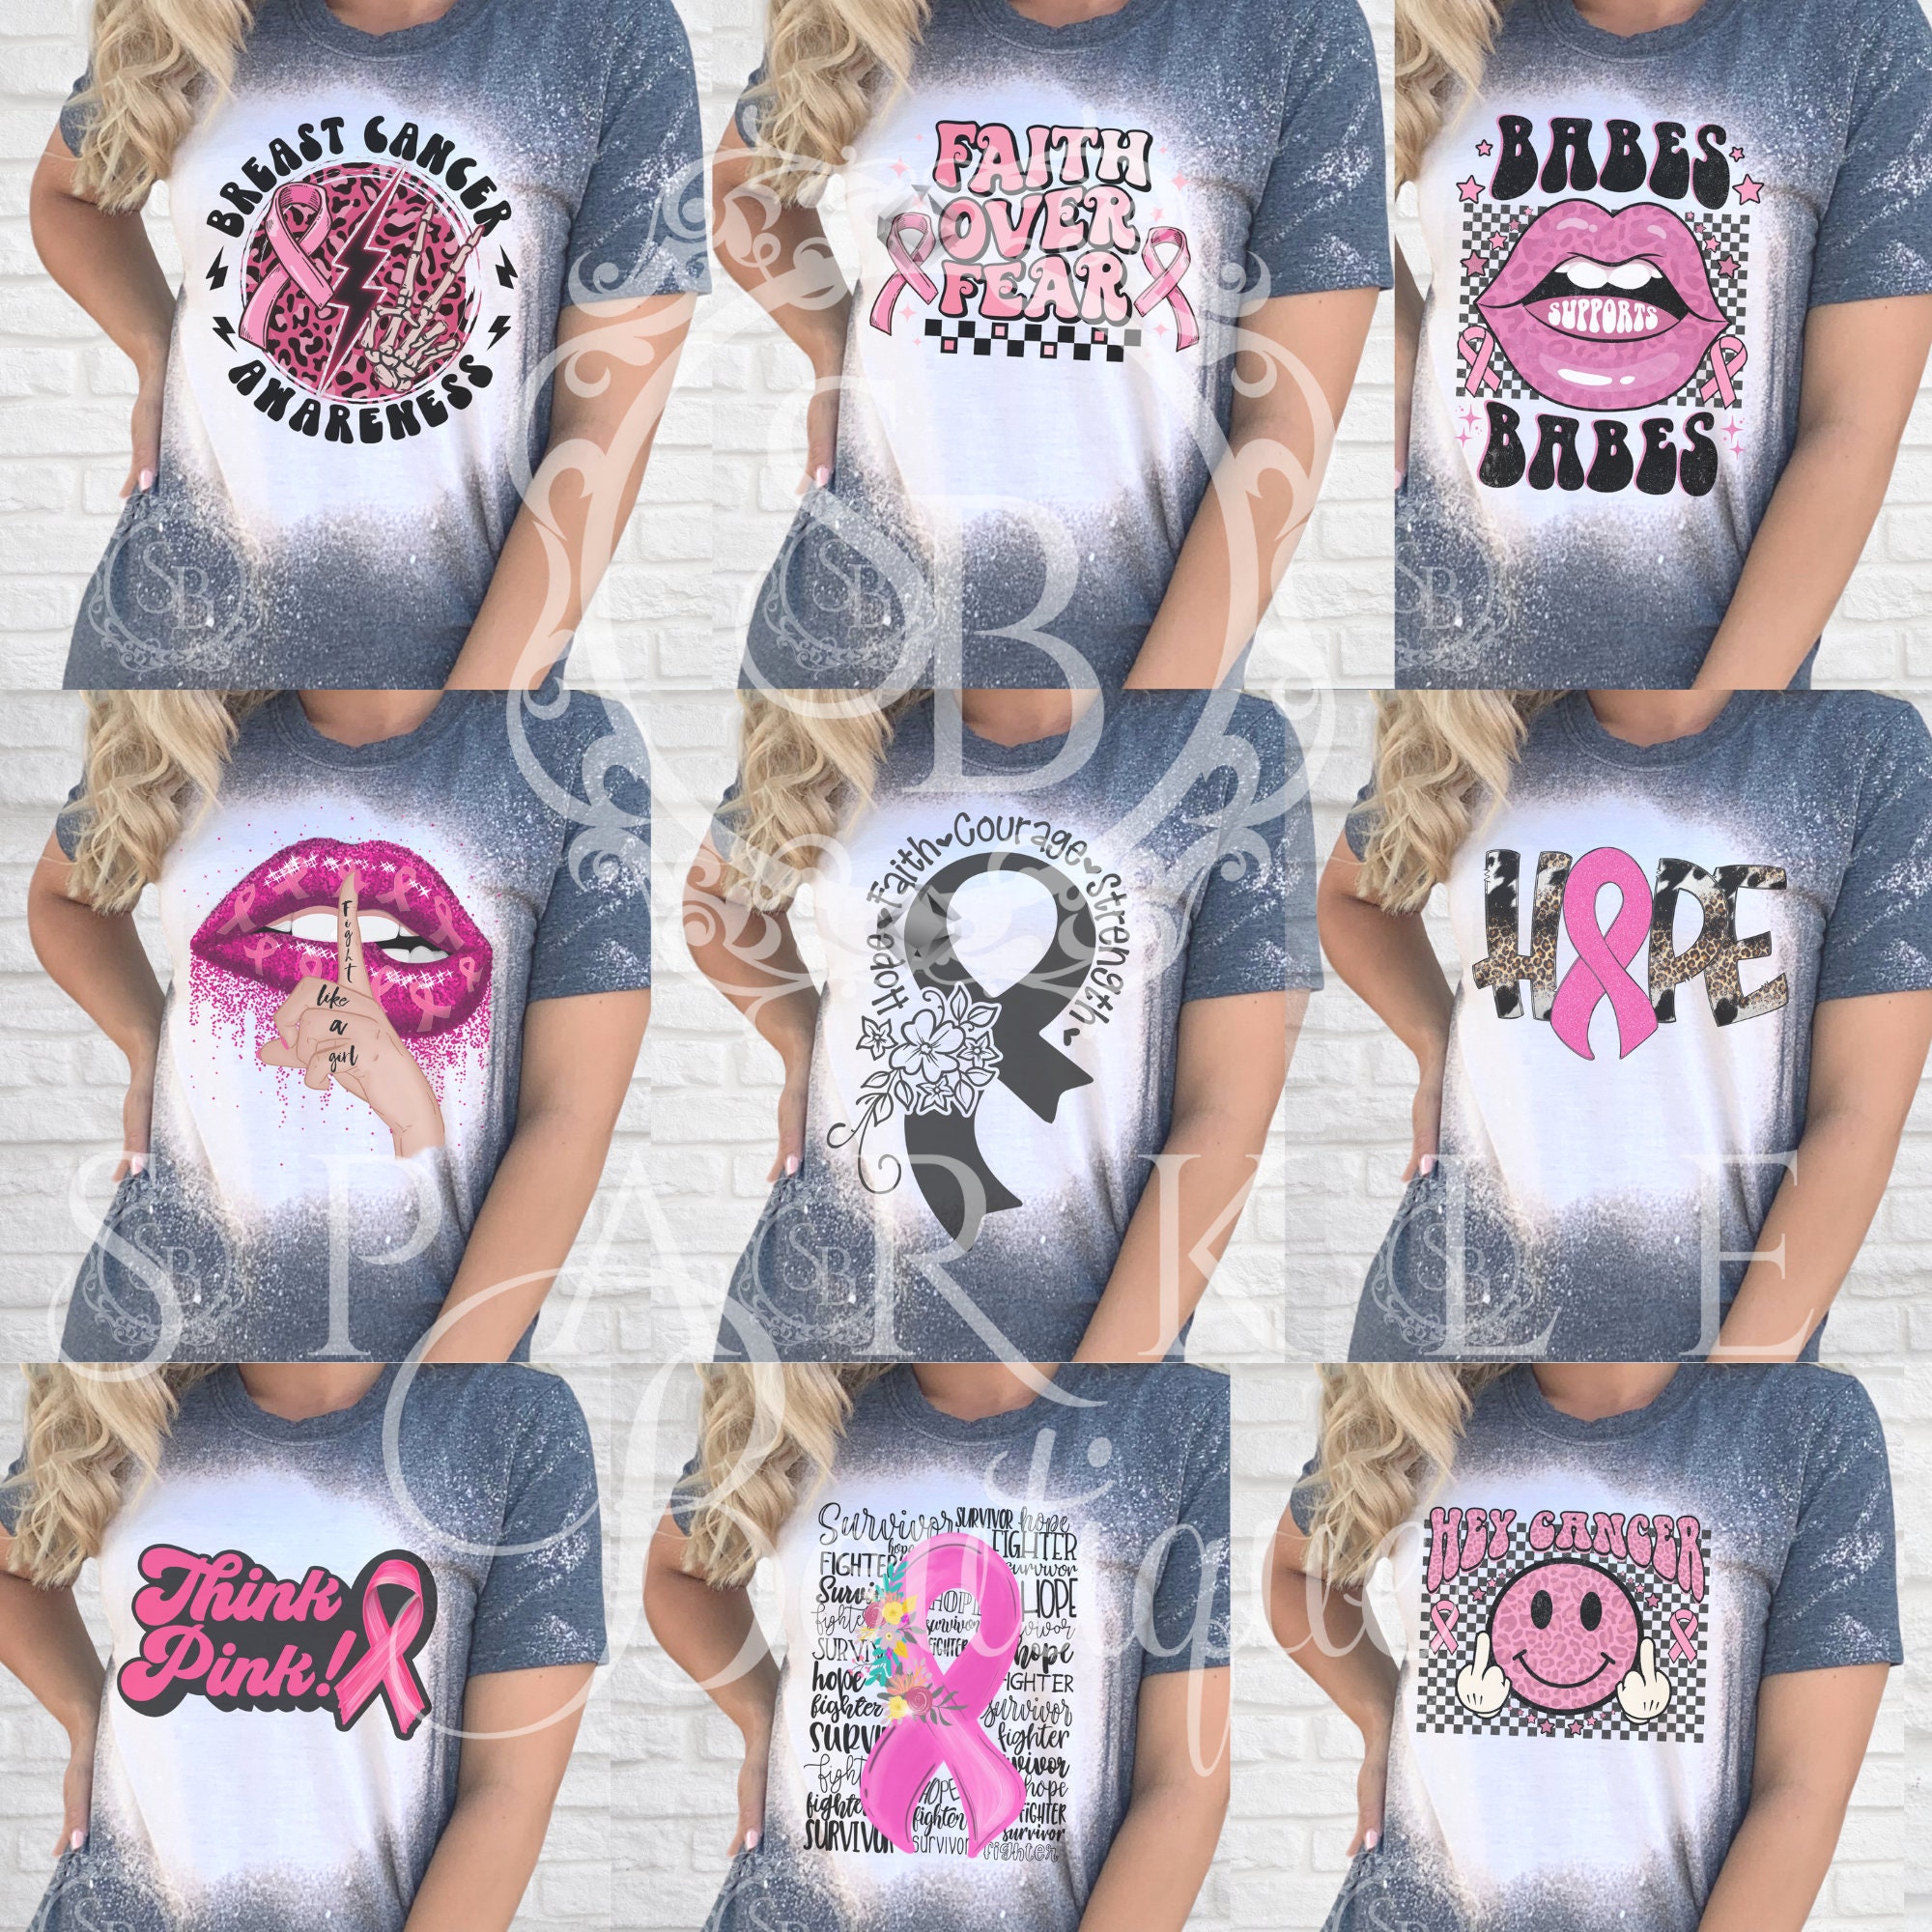 Blessed 24:7 Pink Breast Cancer Awareness Ladies T-Shirt FREE